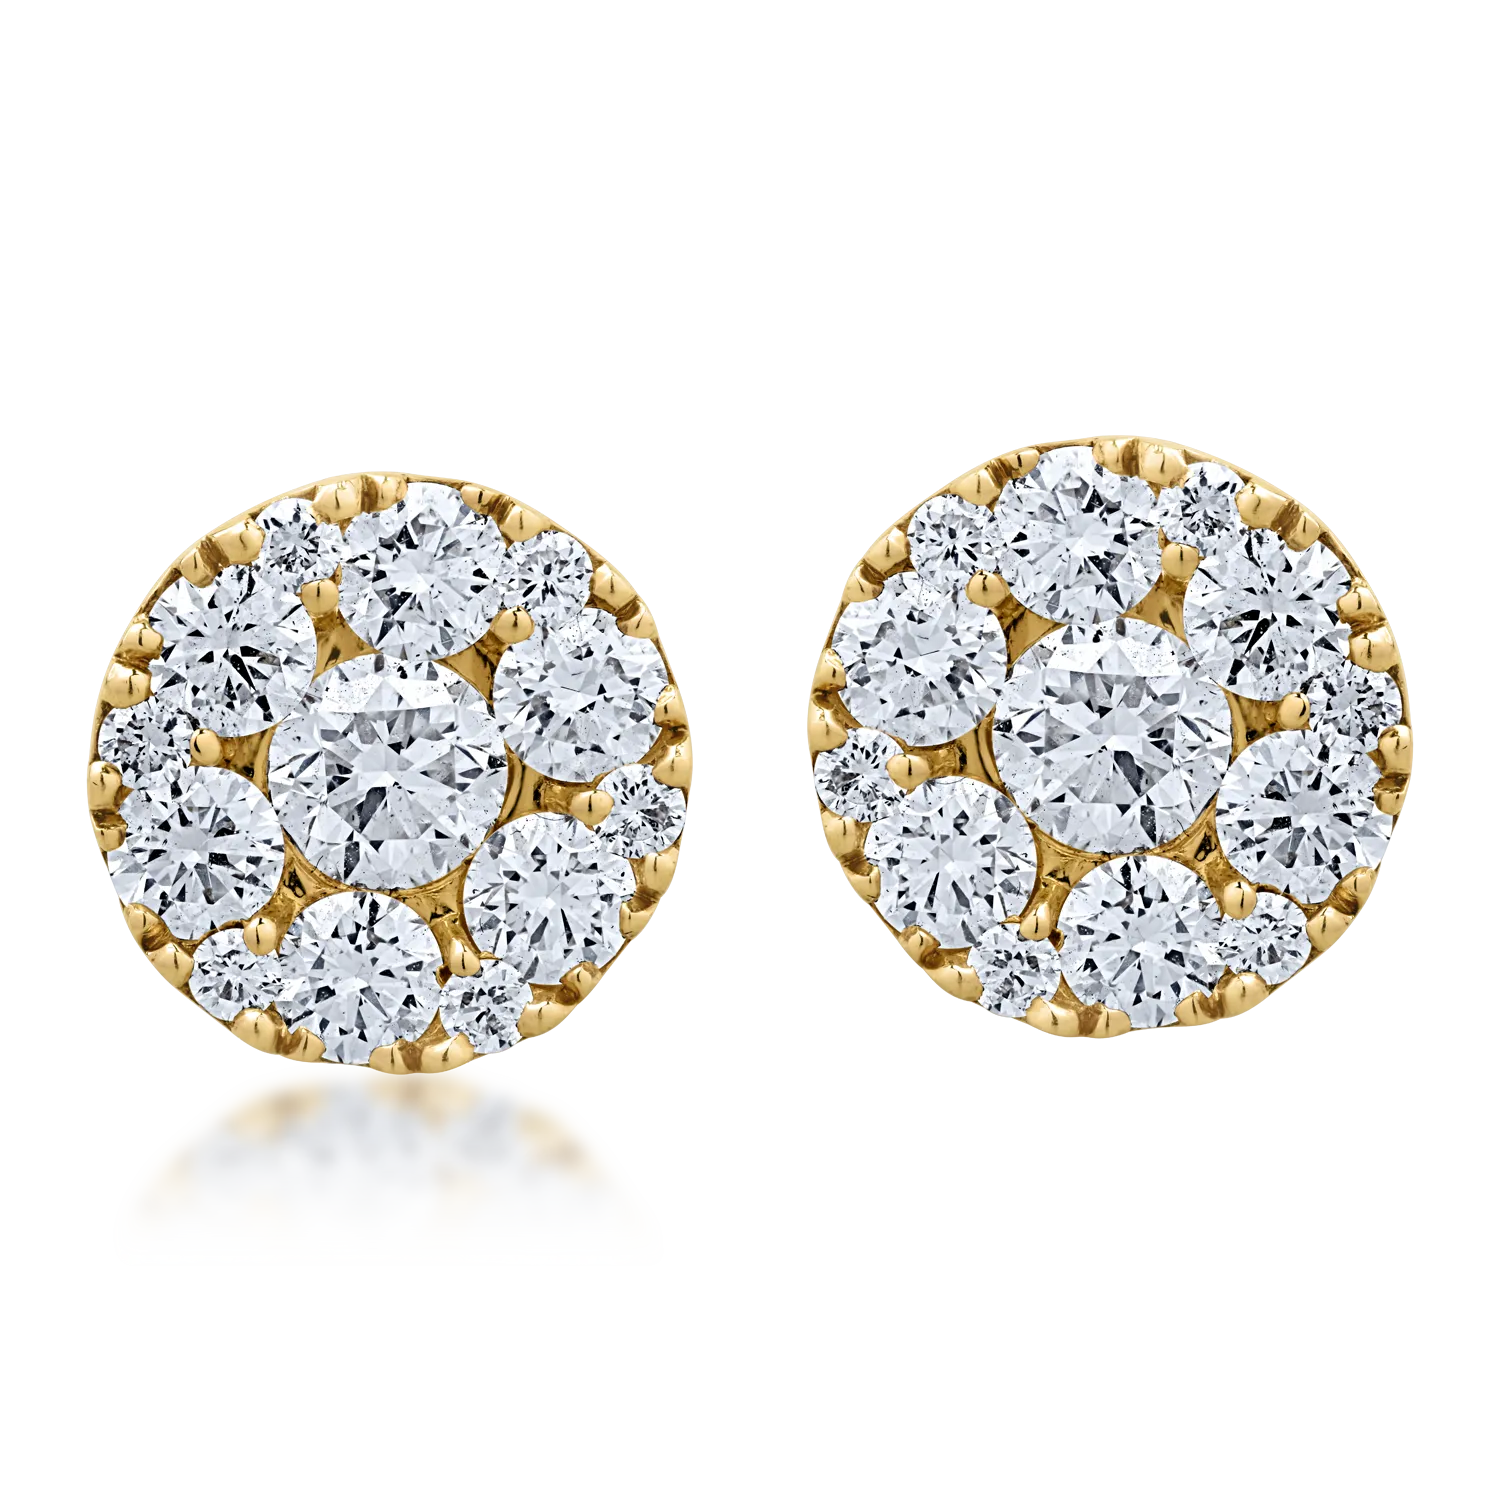 Yellow gold earrings with 2.12ct diamonds